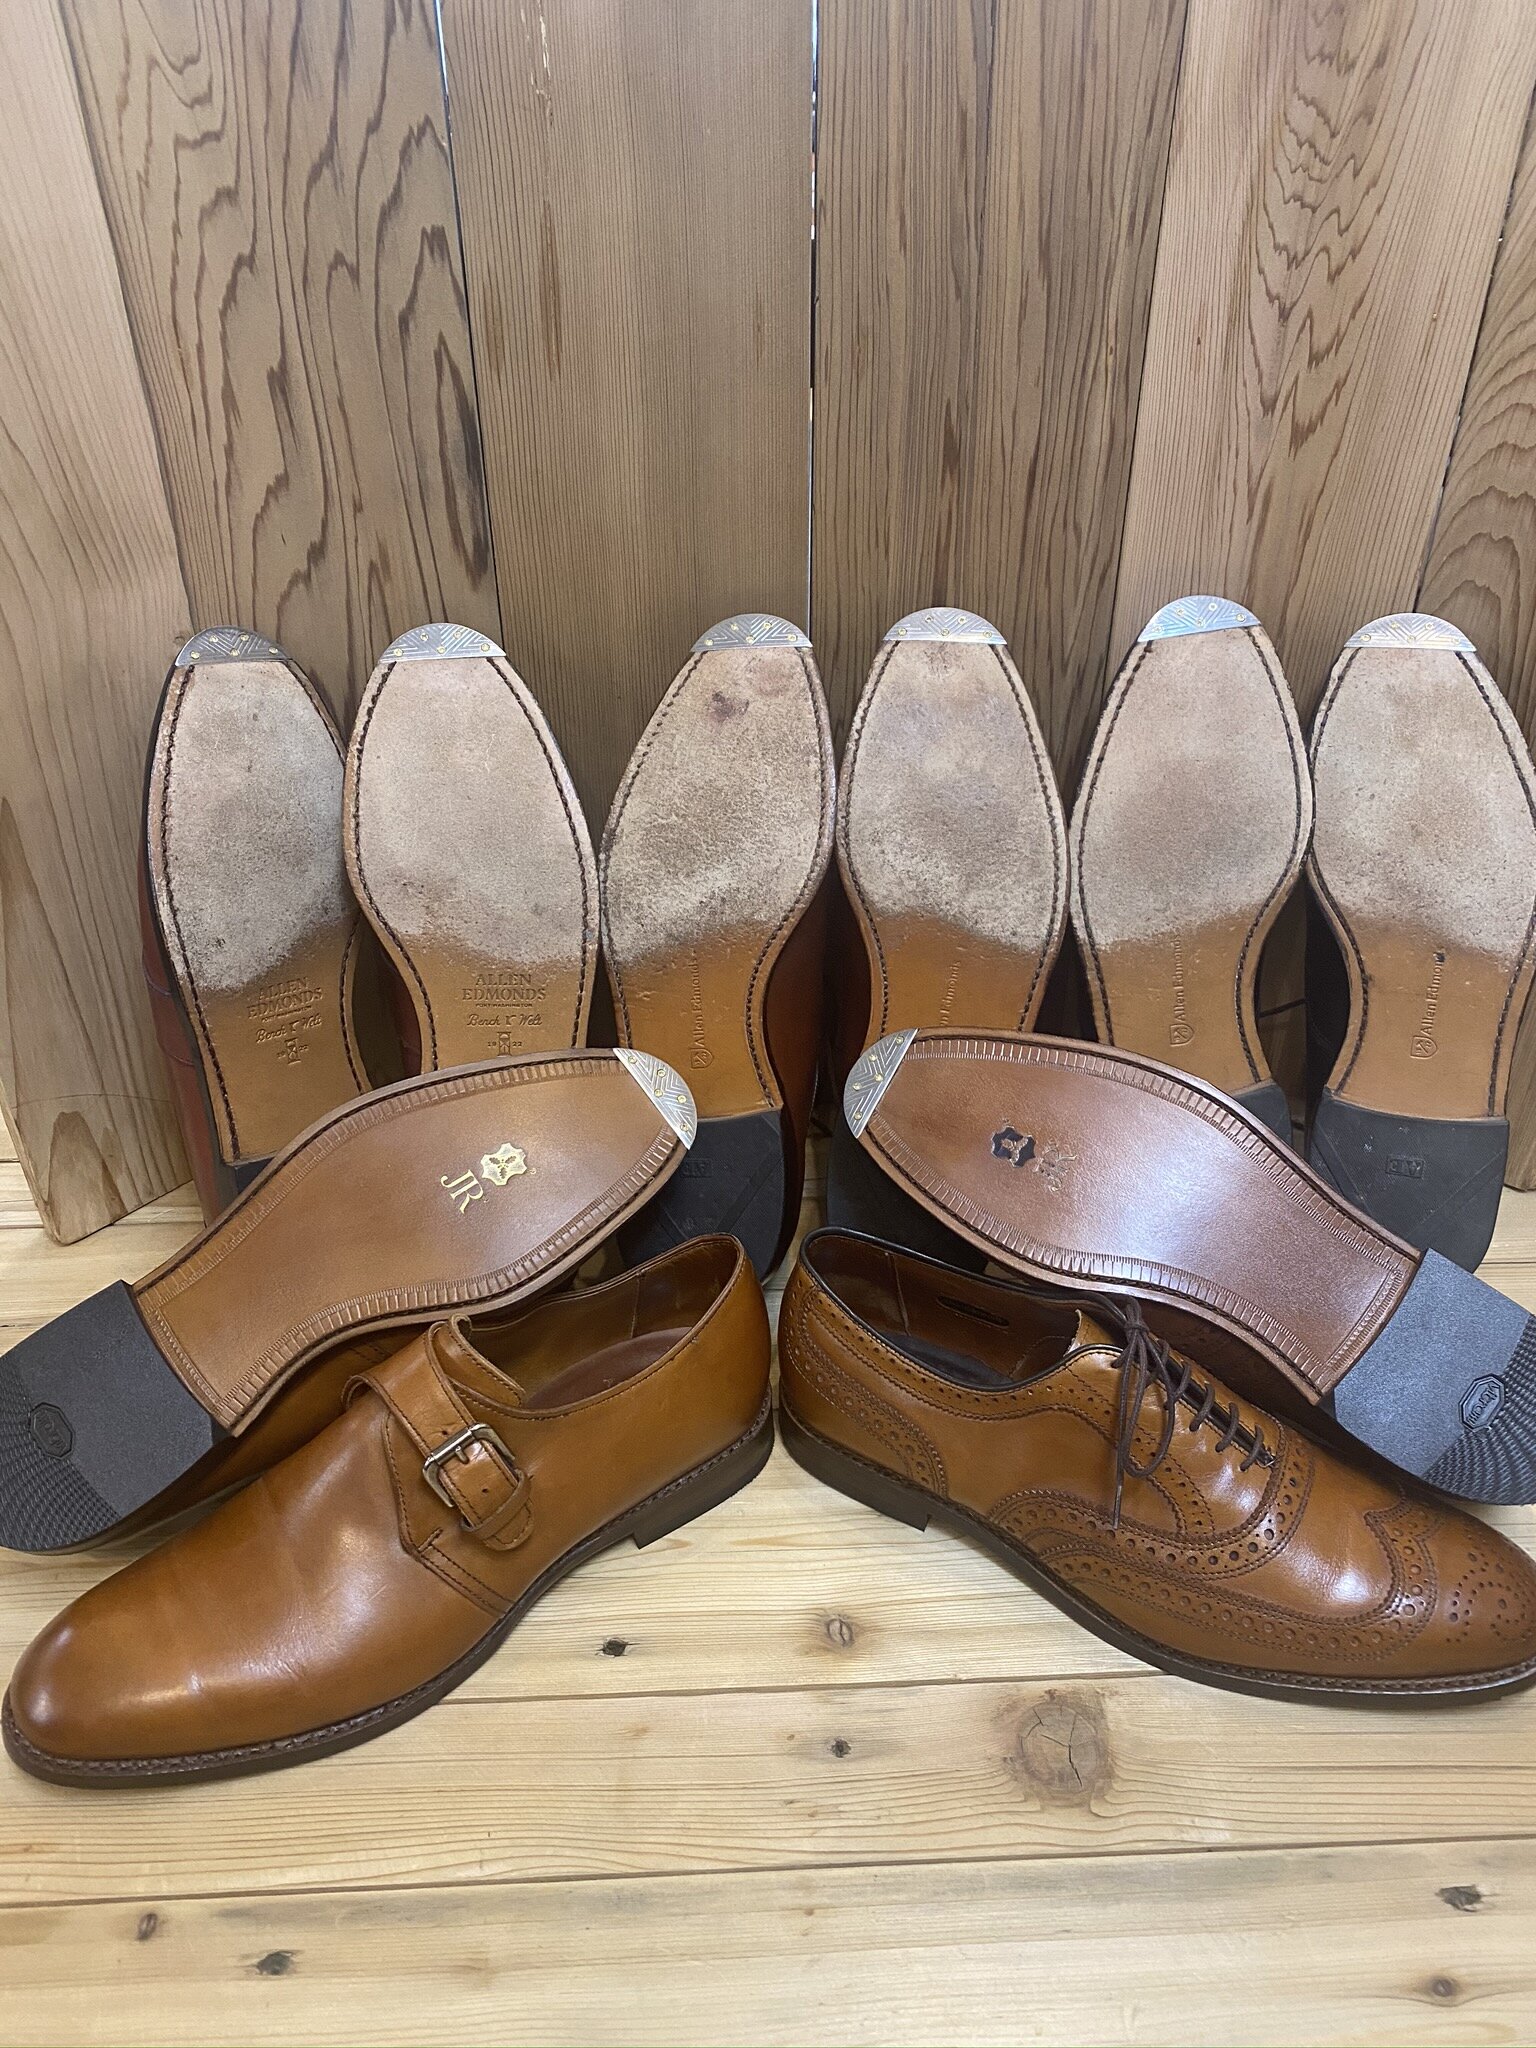 george's shoe and leather repair